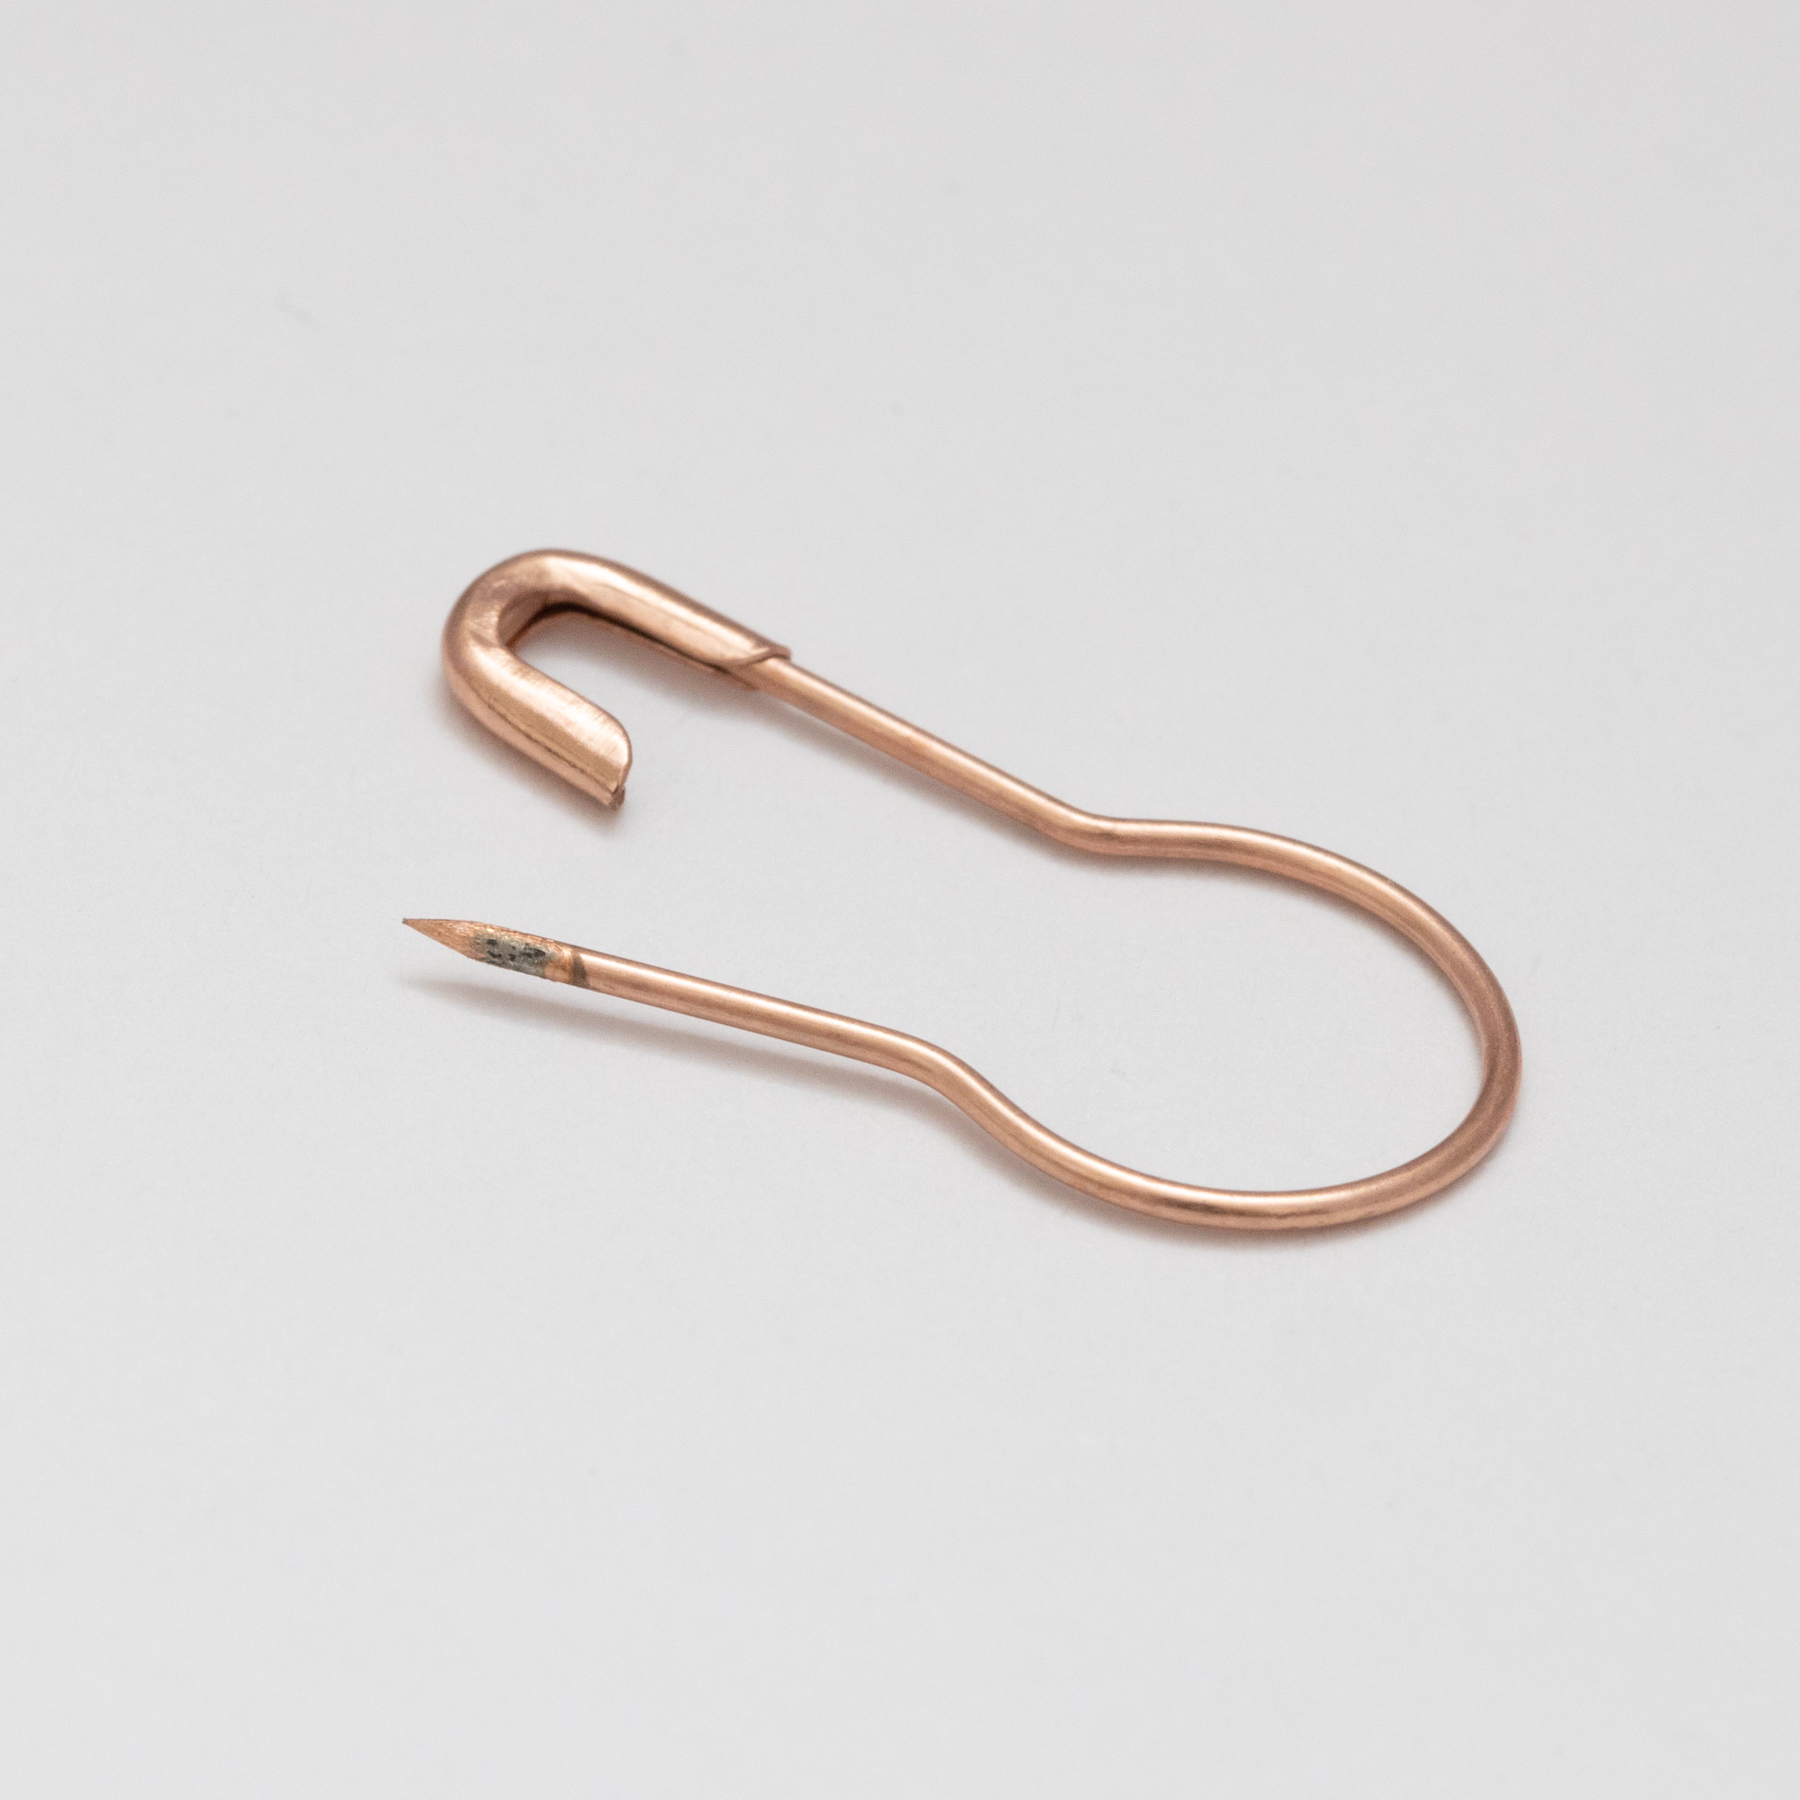 Coppered Bulb Pins